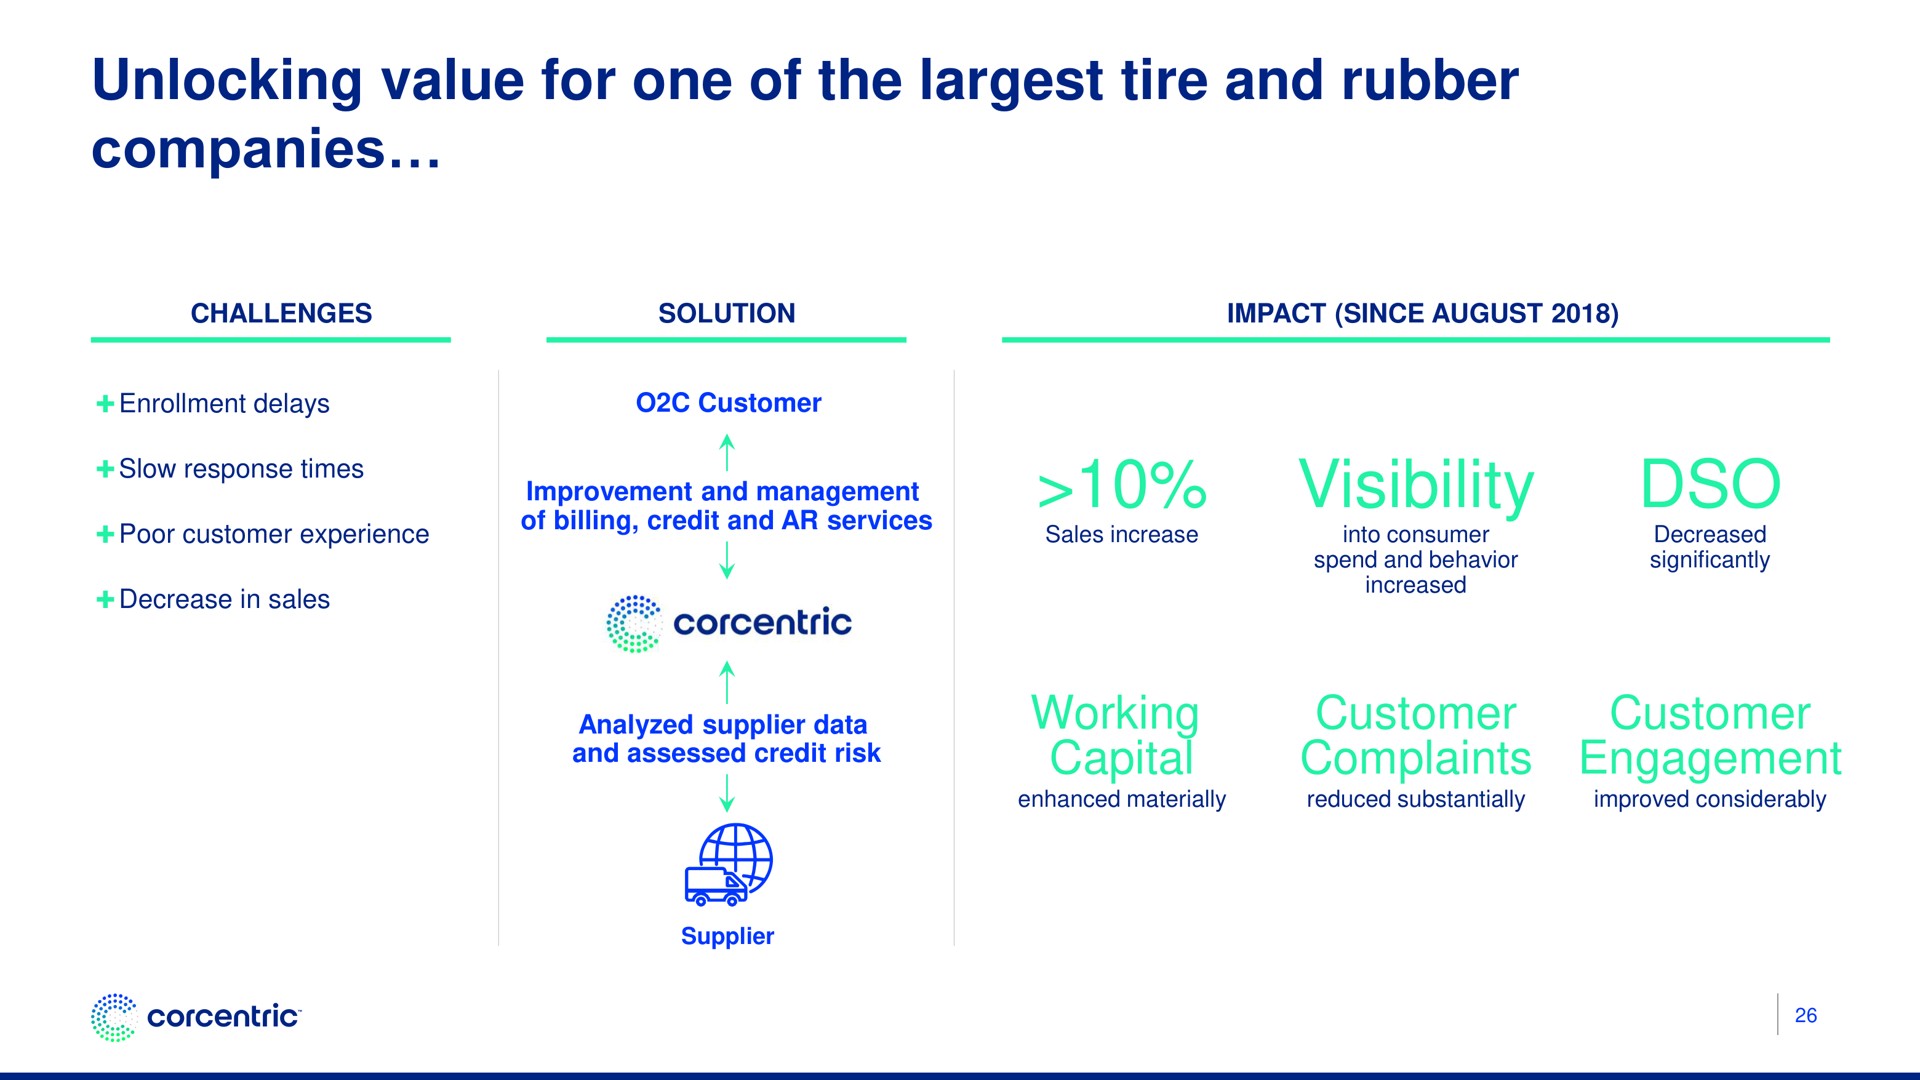 unlocking value for one of the tire and rubber companies visibility working capital customer complaints customer engagement | Corecentric